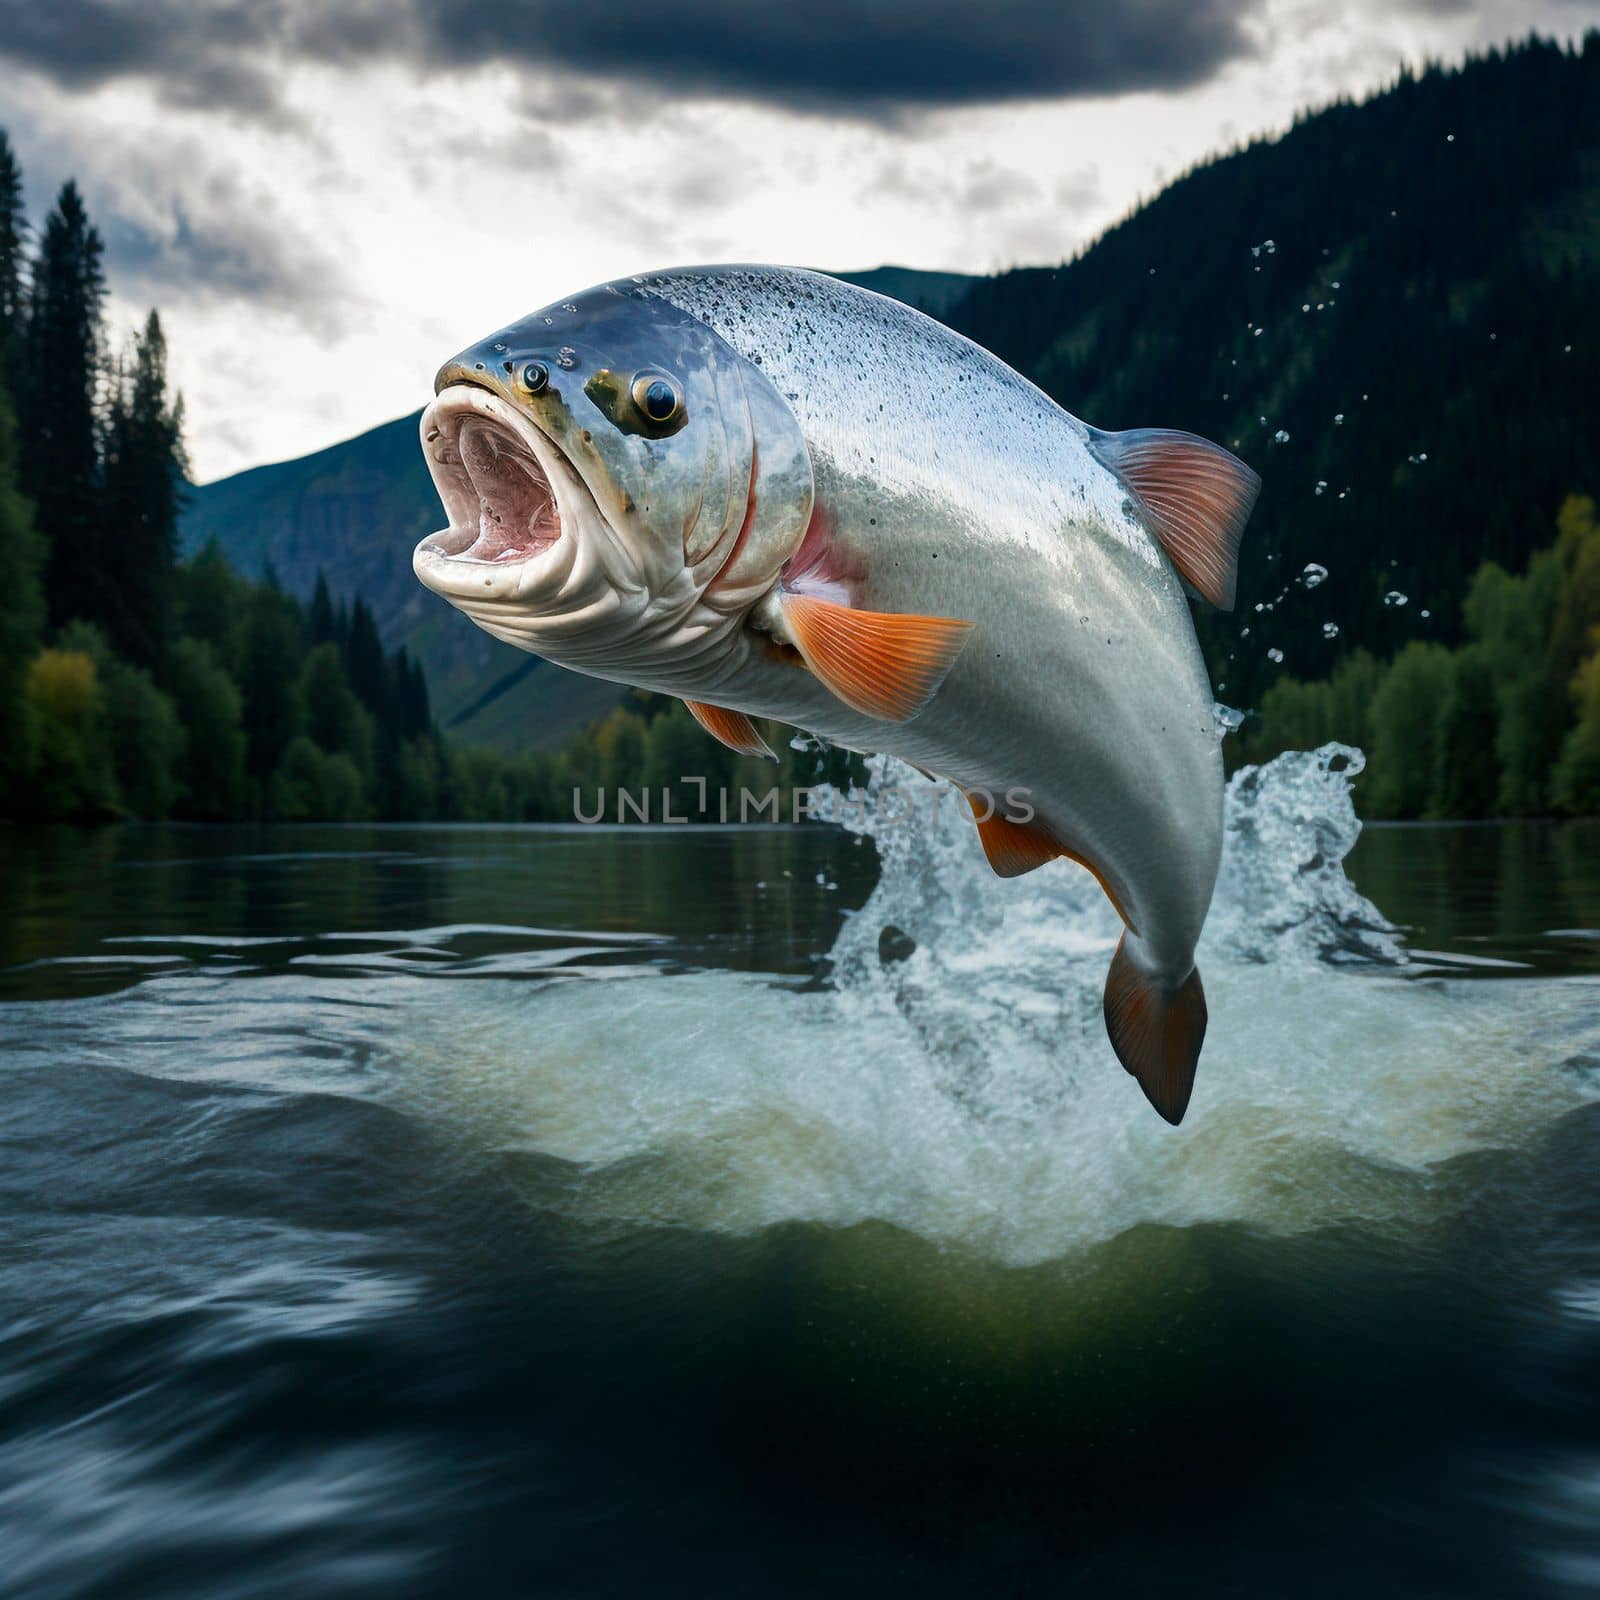 Fish jumping out of the water. High quality illustration